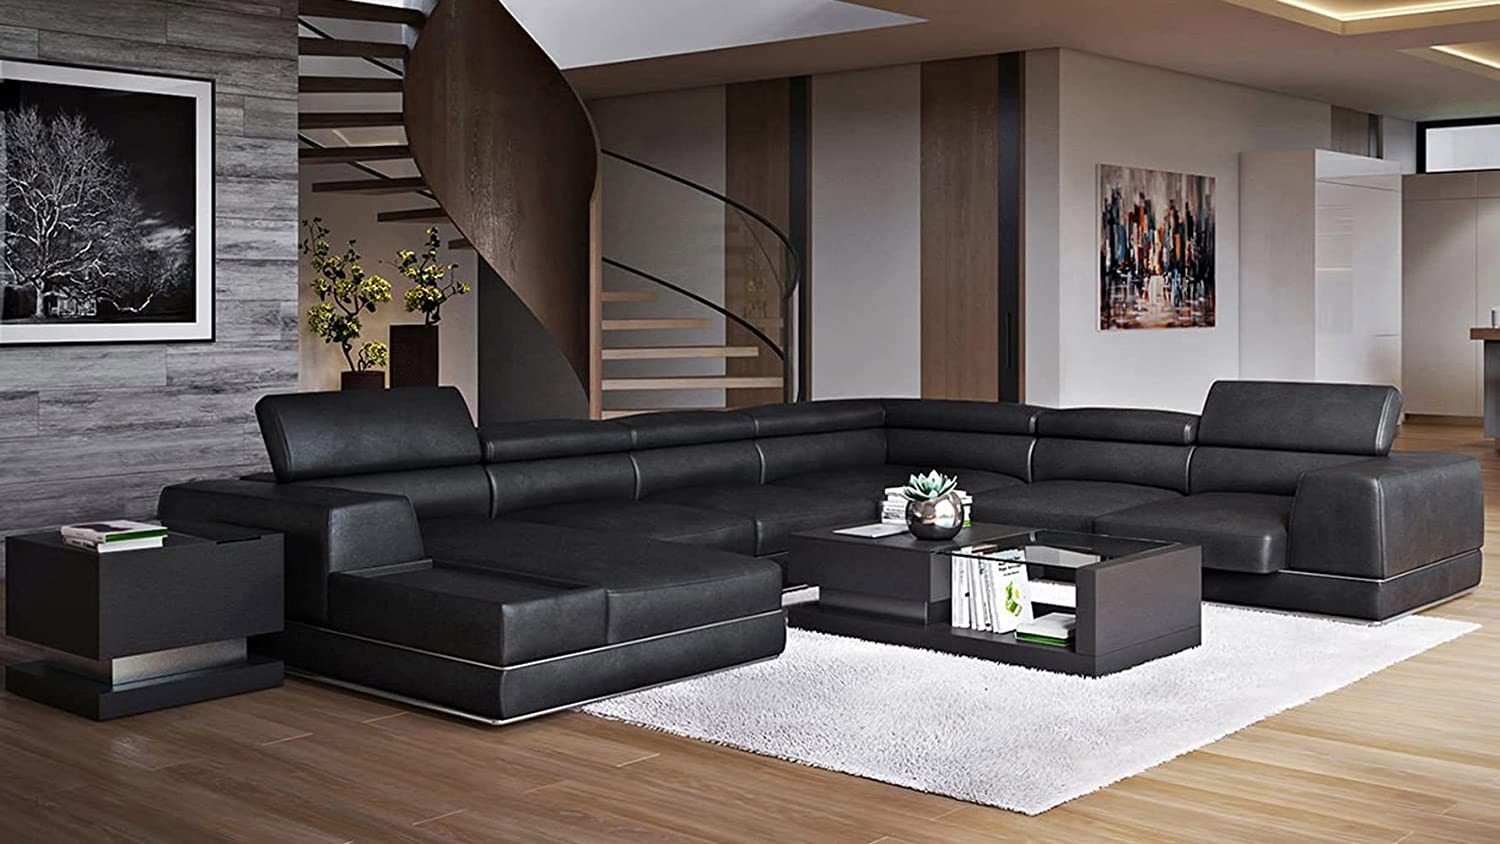 Wynn Black Leather Sectional Sofa with Adjustable Headrests